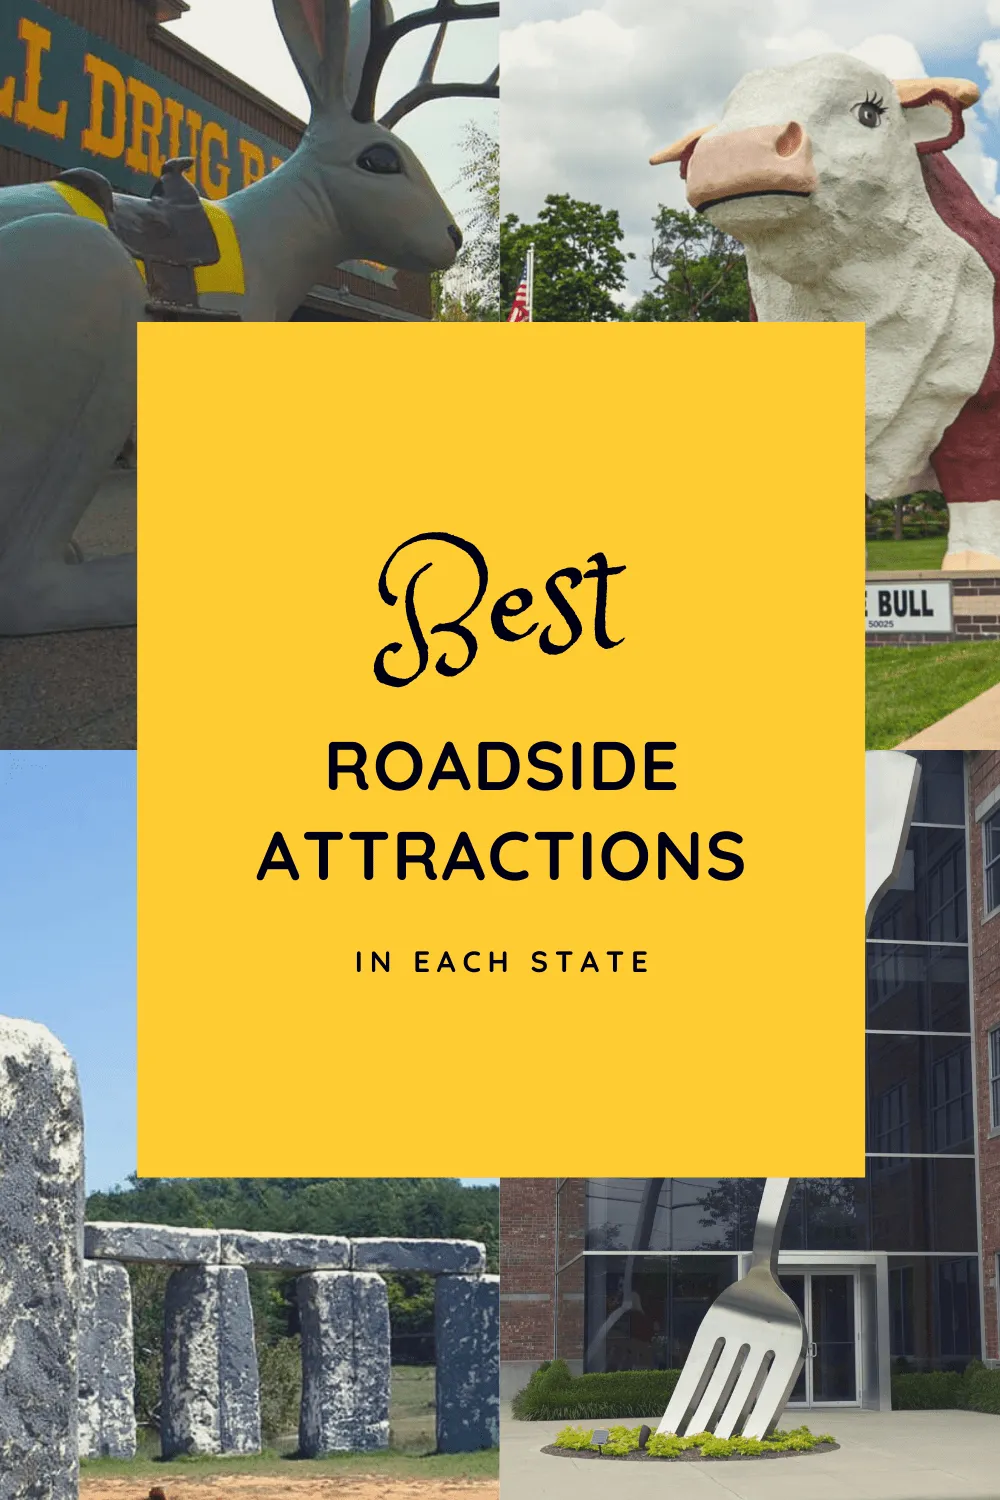 What do you see on a road trip? Find the best roadside attractions in each state - from Alabama to Wyoming, visit these weird tourist attractions and strange and unique locations on your road trip across the United States. They're fun road trip stops for kids or adults! #RoadsideAttraction #RoadsideAttractions #WeirdRoadsideAttractions #VintageRoadsideAttractions #RoadTripStops #WorldsLargestRoadsideAttractions #RoadTrip #USARoadsideAttractions #AmericanRoadsideAttractions #USA #America